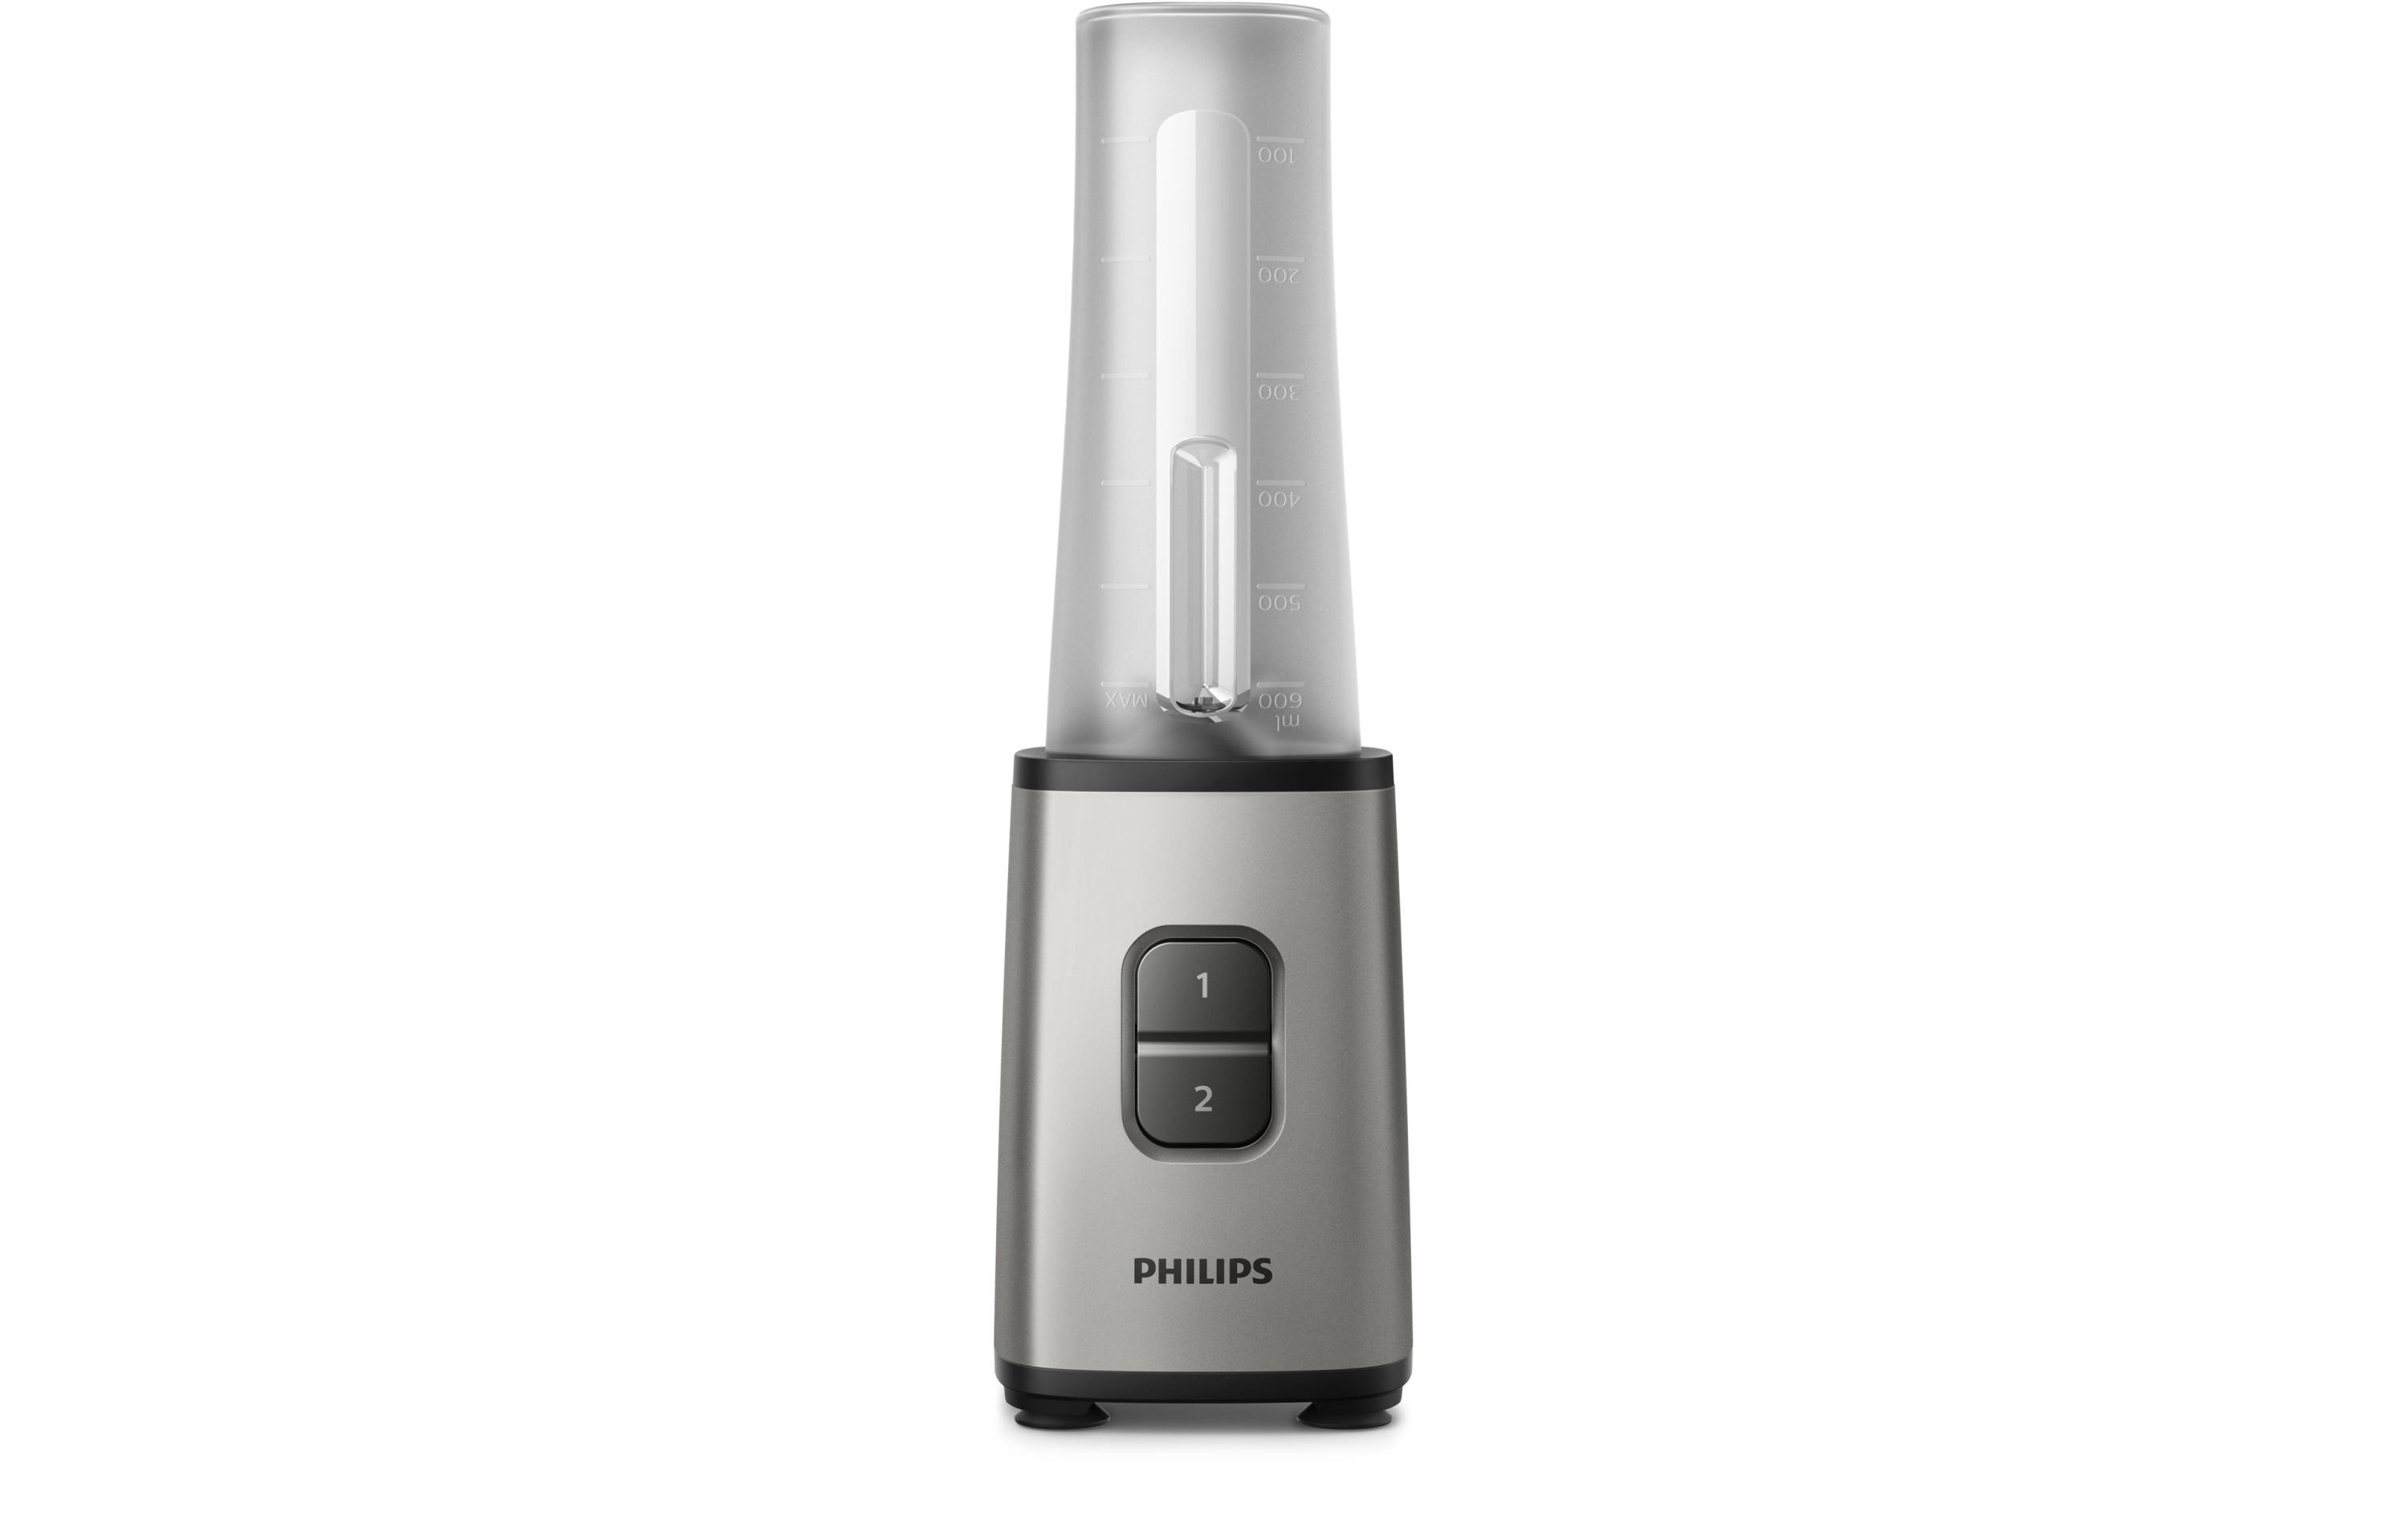 Philips Standmixer Daily Collection Minimixer HR2600/80 Grau